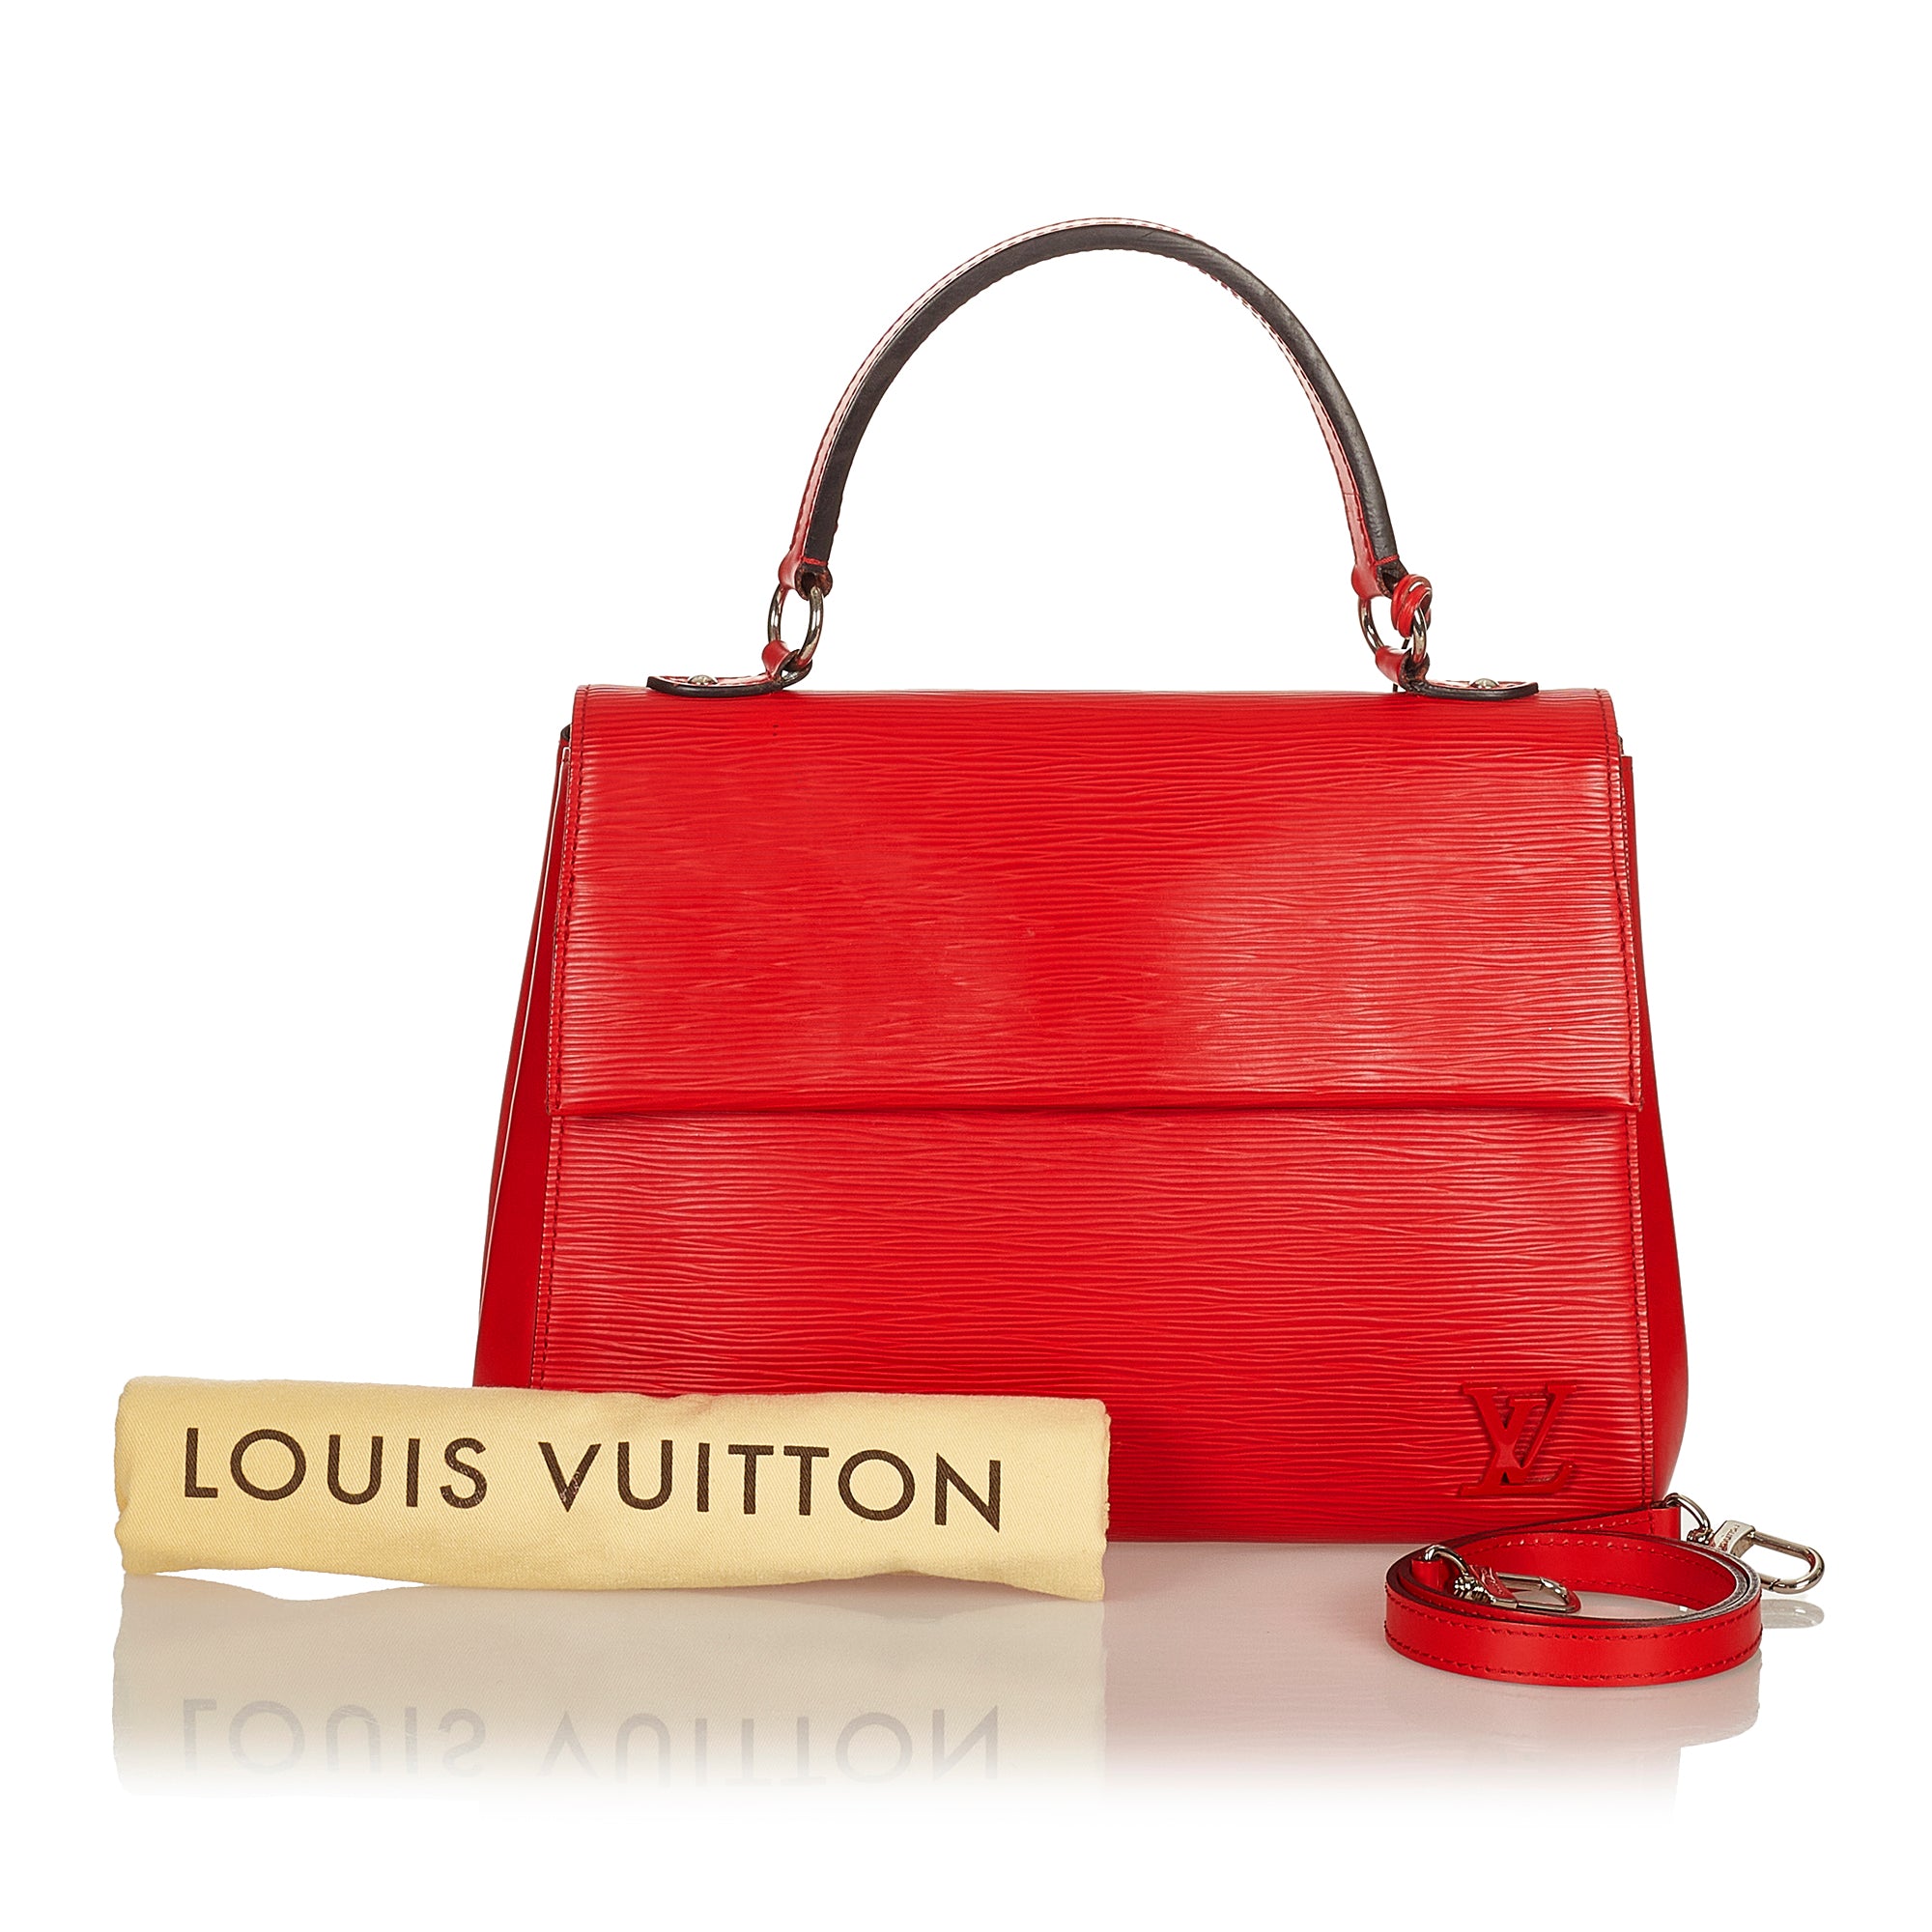 Products by Louis Vuitton: Cluny BB